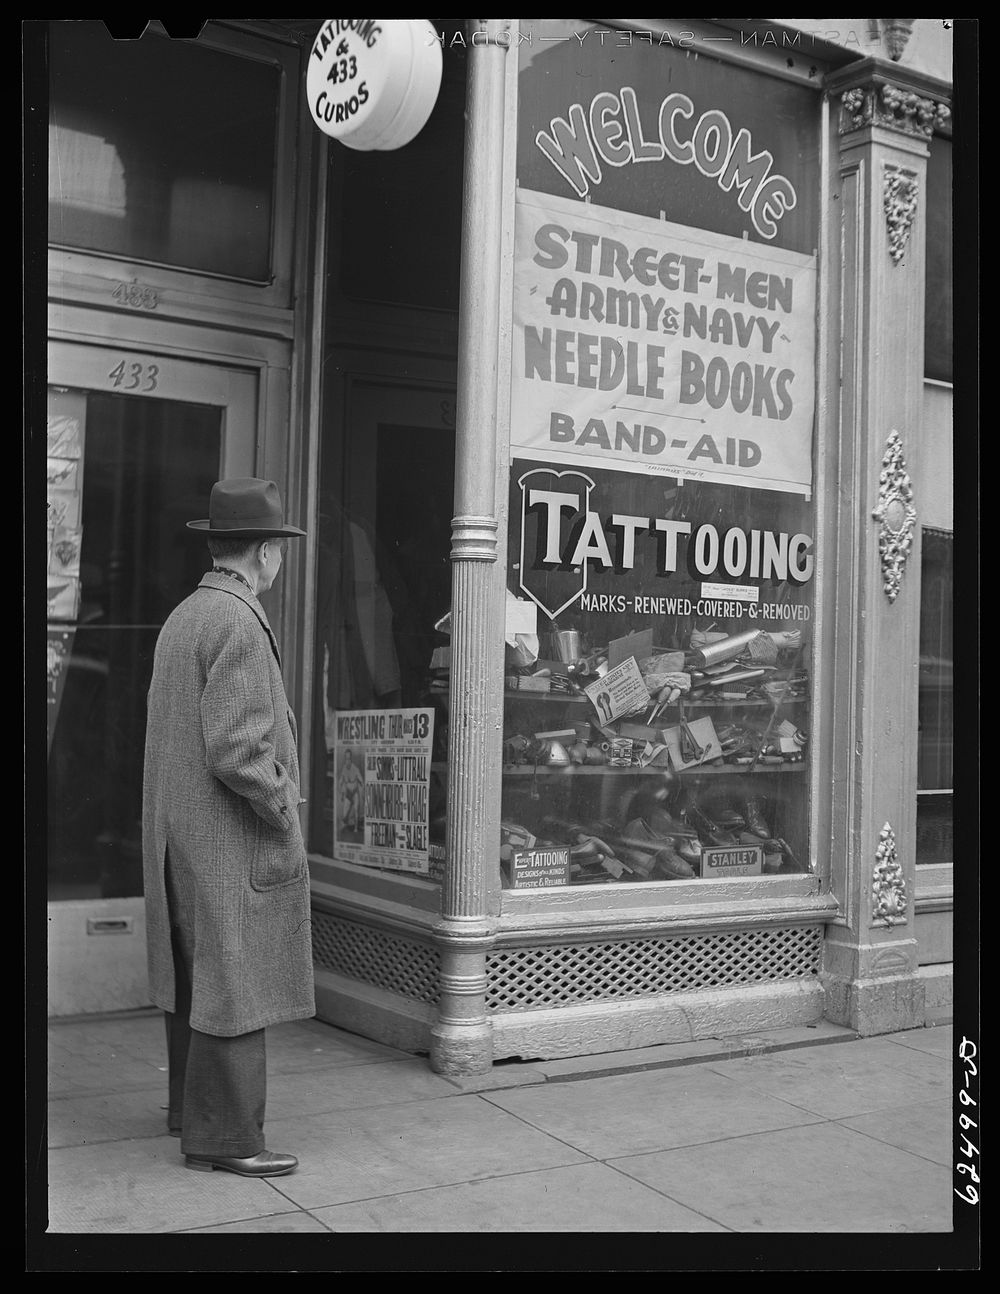 Tatooing shop on West Main Street. Norfolk, Virginia. Sourced from the Library of Congress.